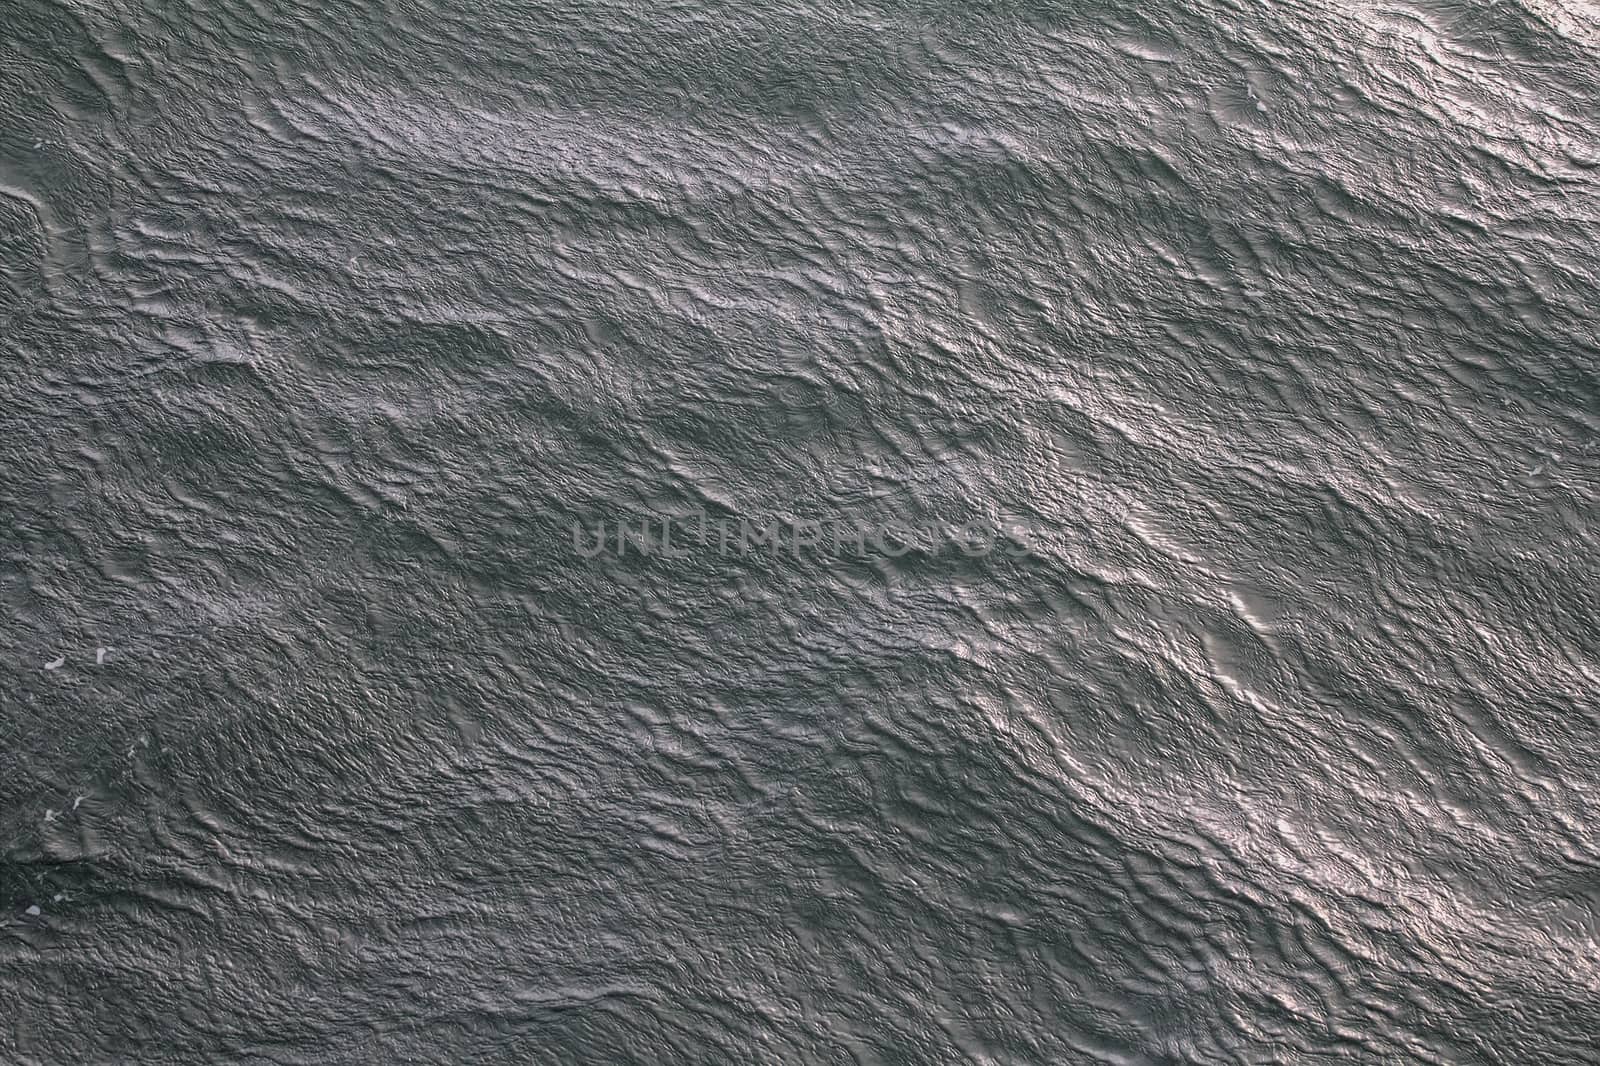 gust of heavy wind and ripples on water. View from top. Kara sea.